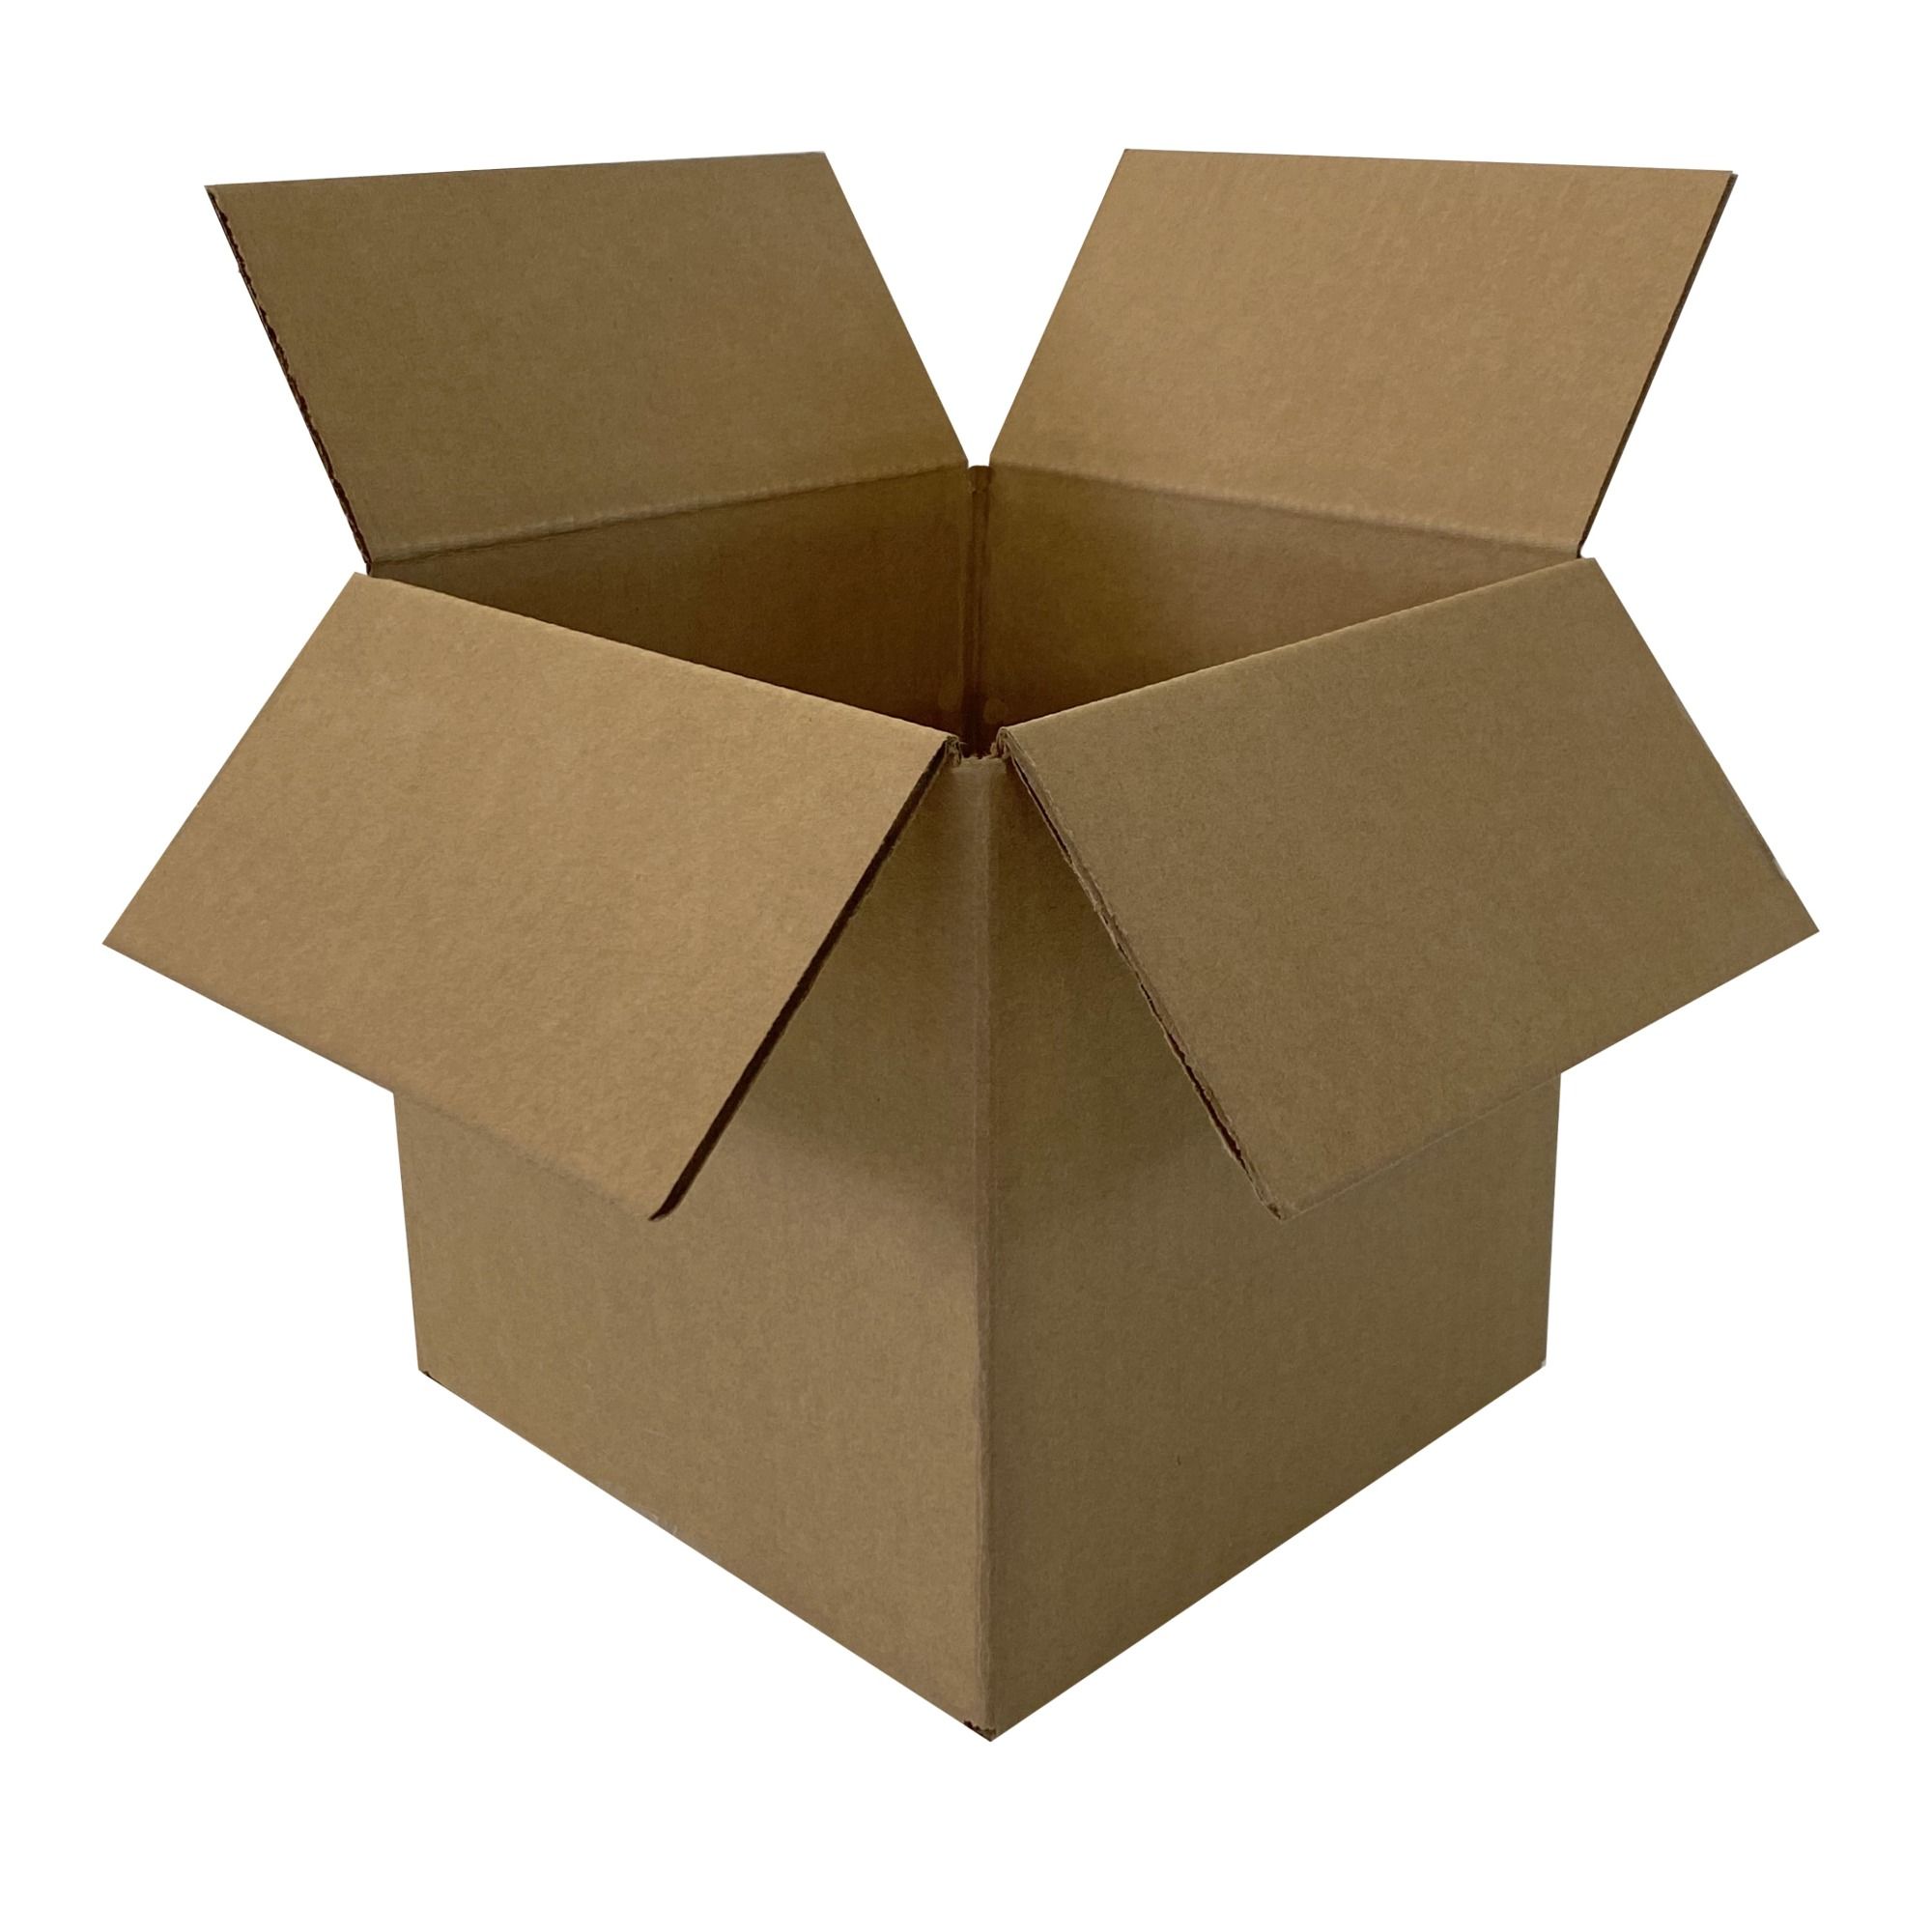 50 x SMALL MAILING PACKING CARDBOARD BOXES 4x4x4" CUBE 